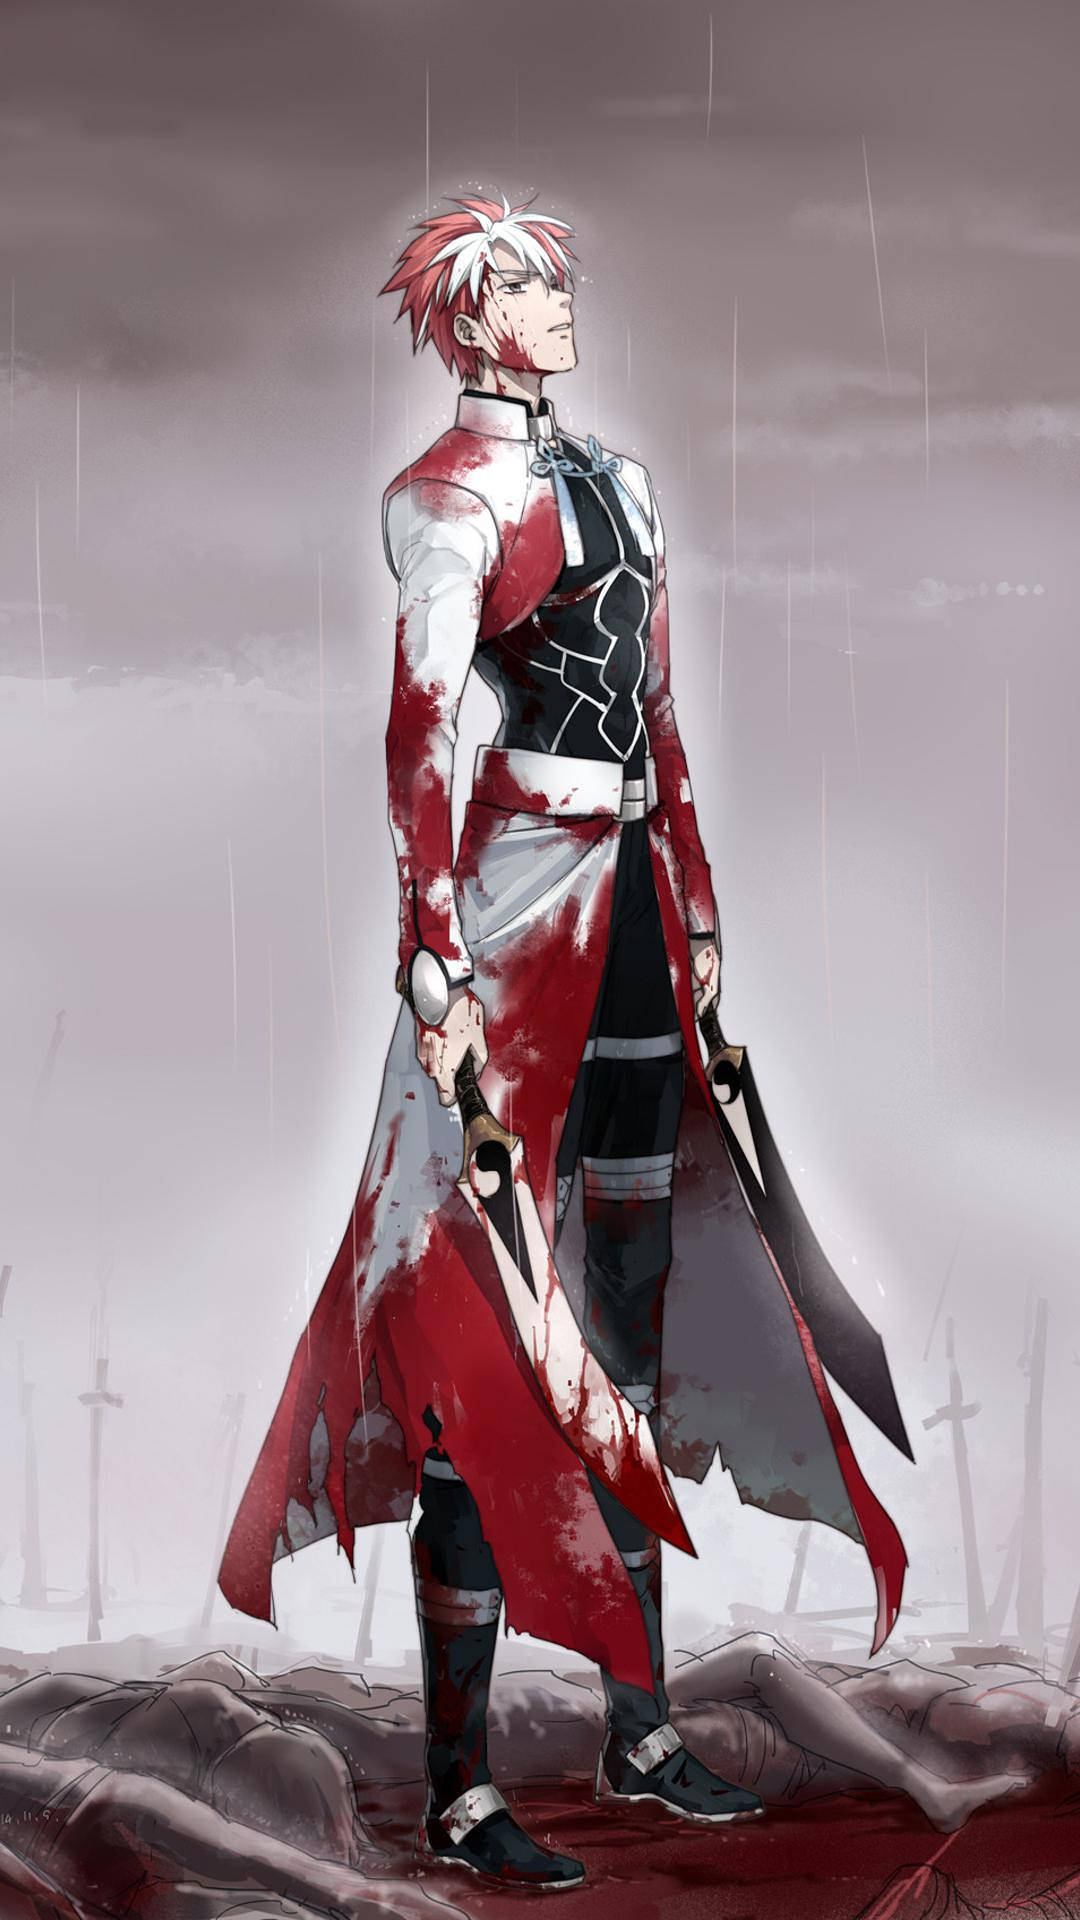 Download Bloody Boy Edgy Anime Pfp Wallpaper | Wallpapers.com